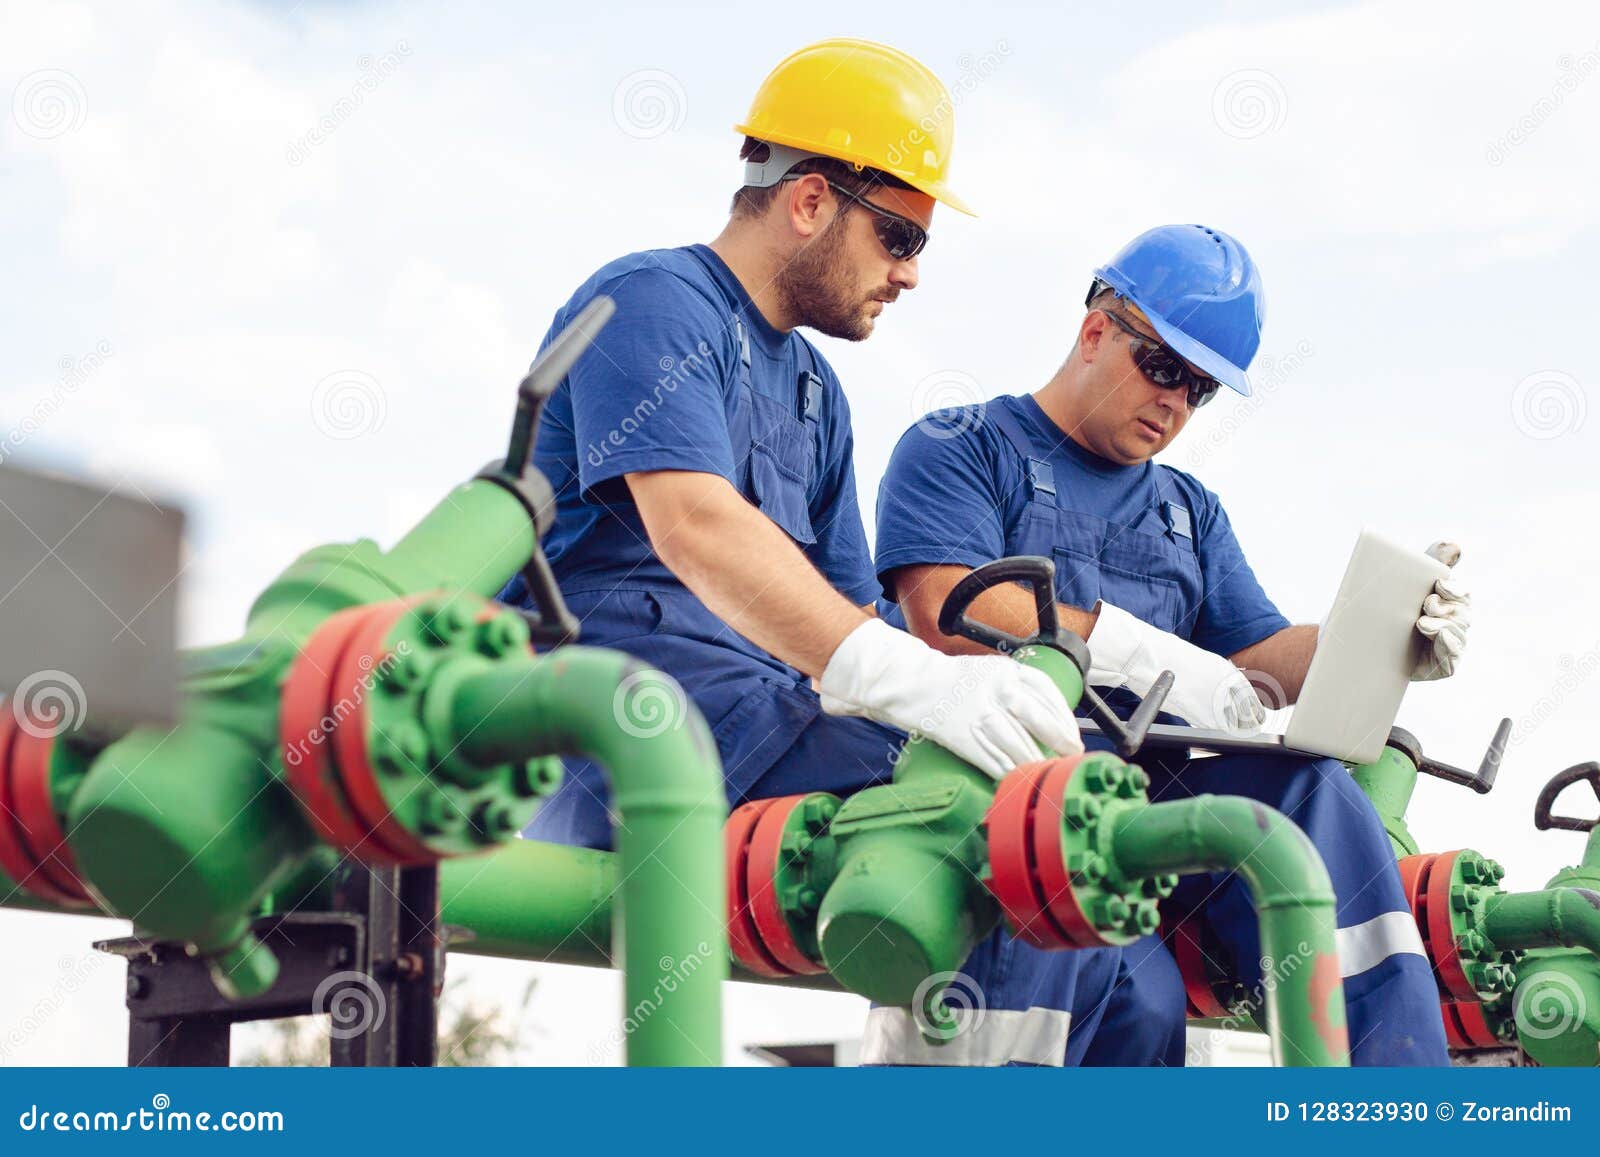 engineer in the oil and natural gas field, pipeline, refinery